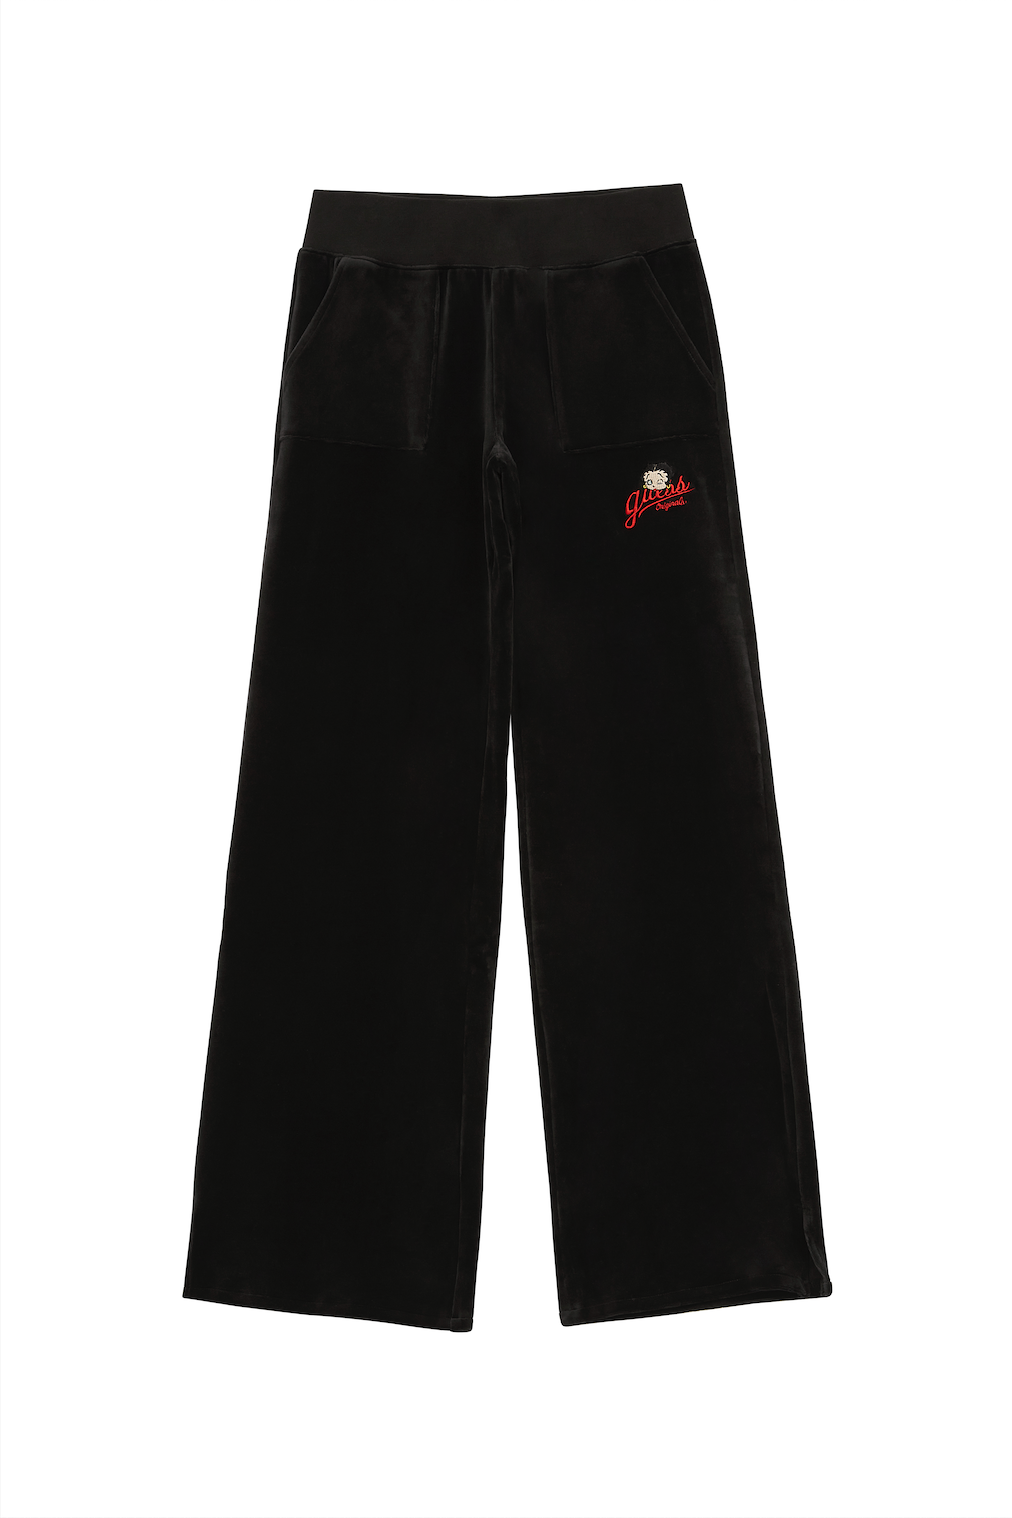 Velour pants with a logo patch on one leg